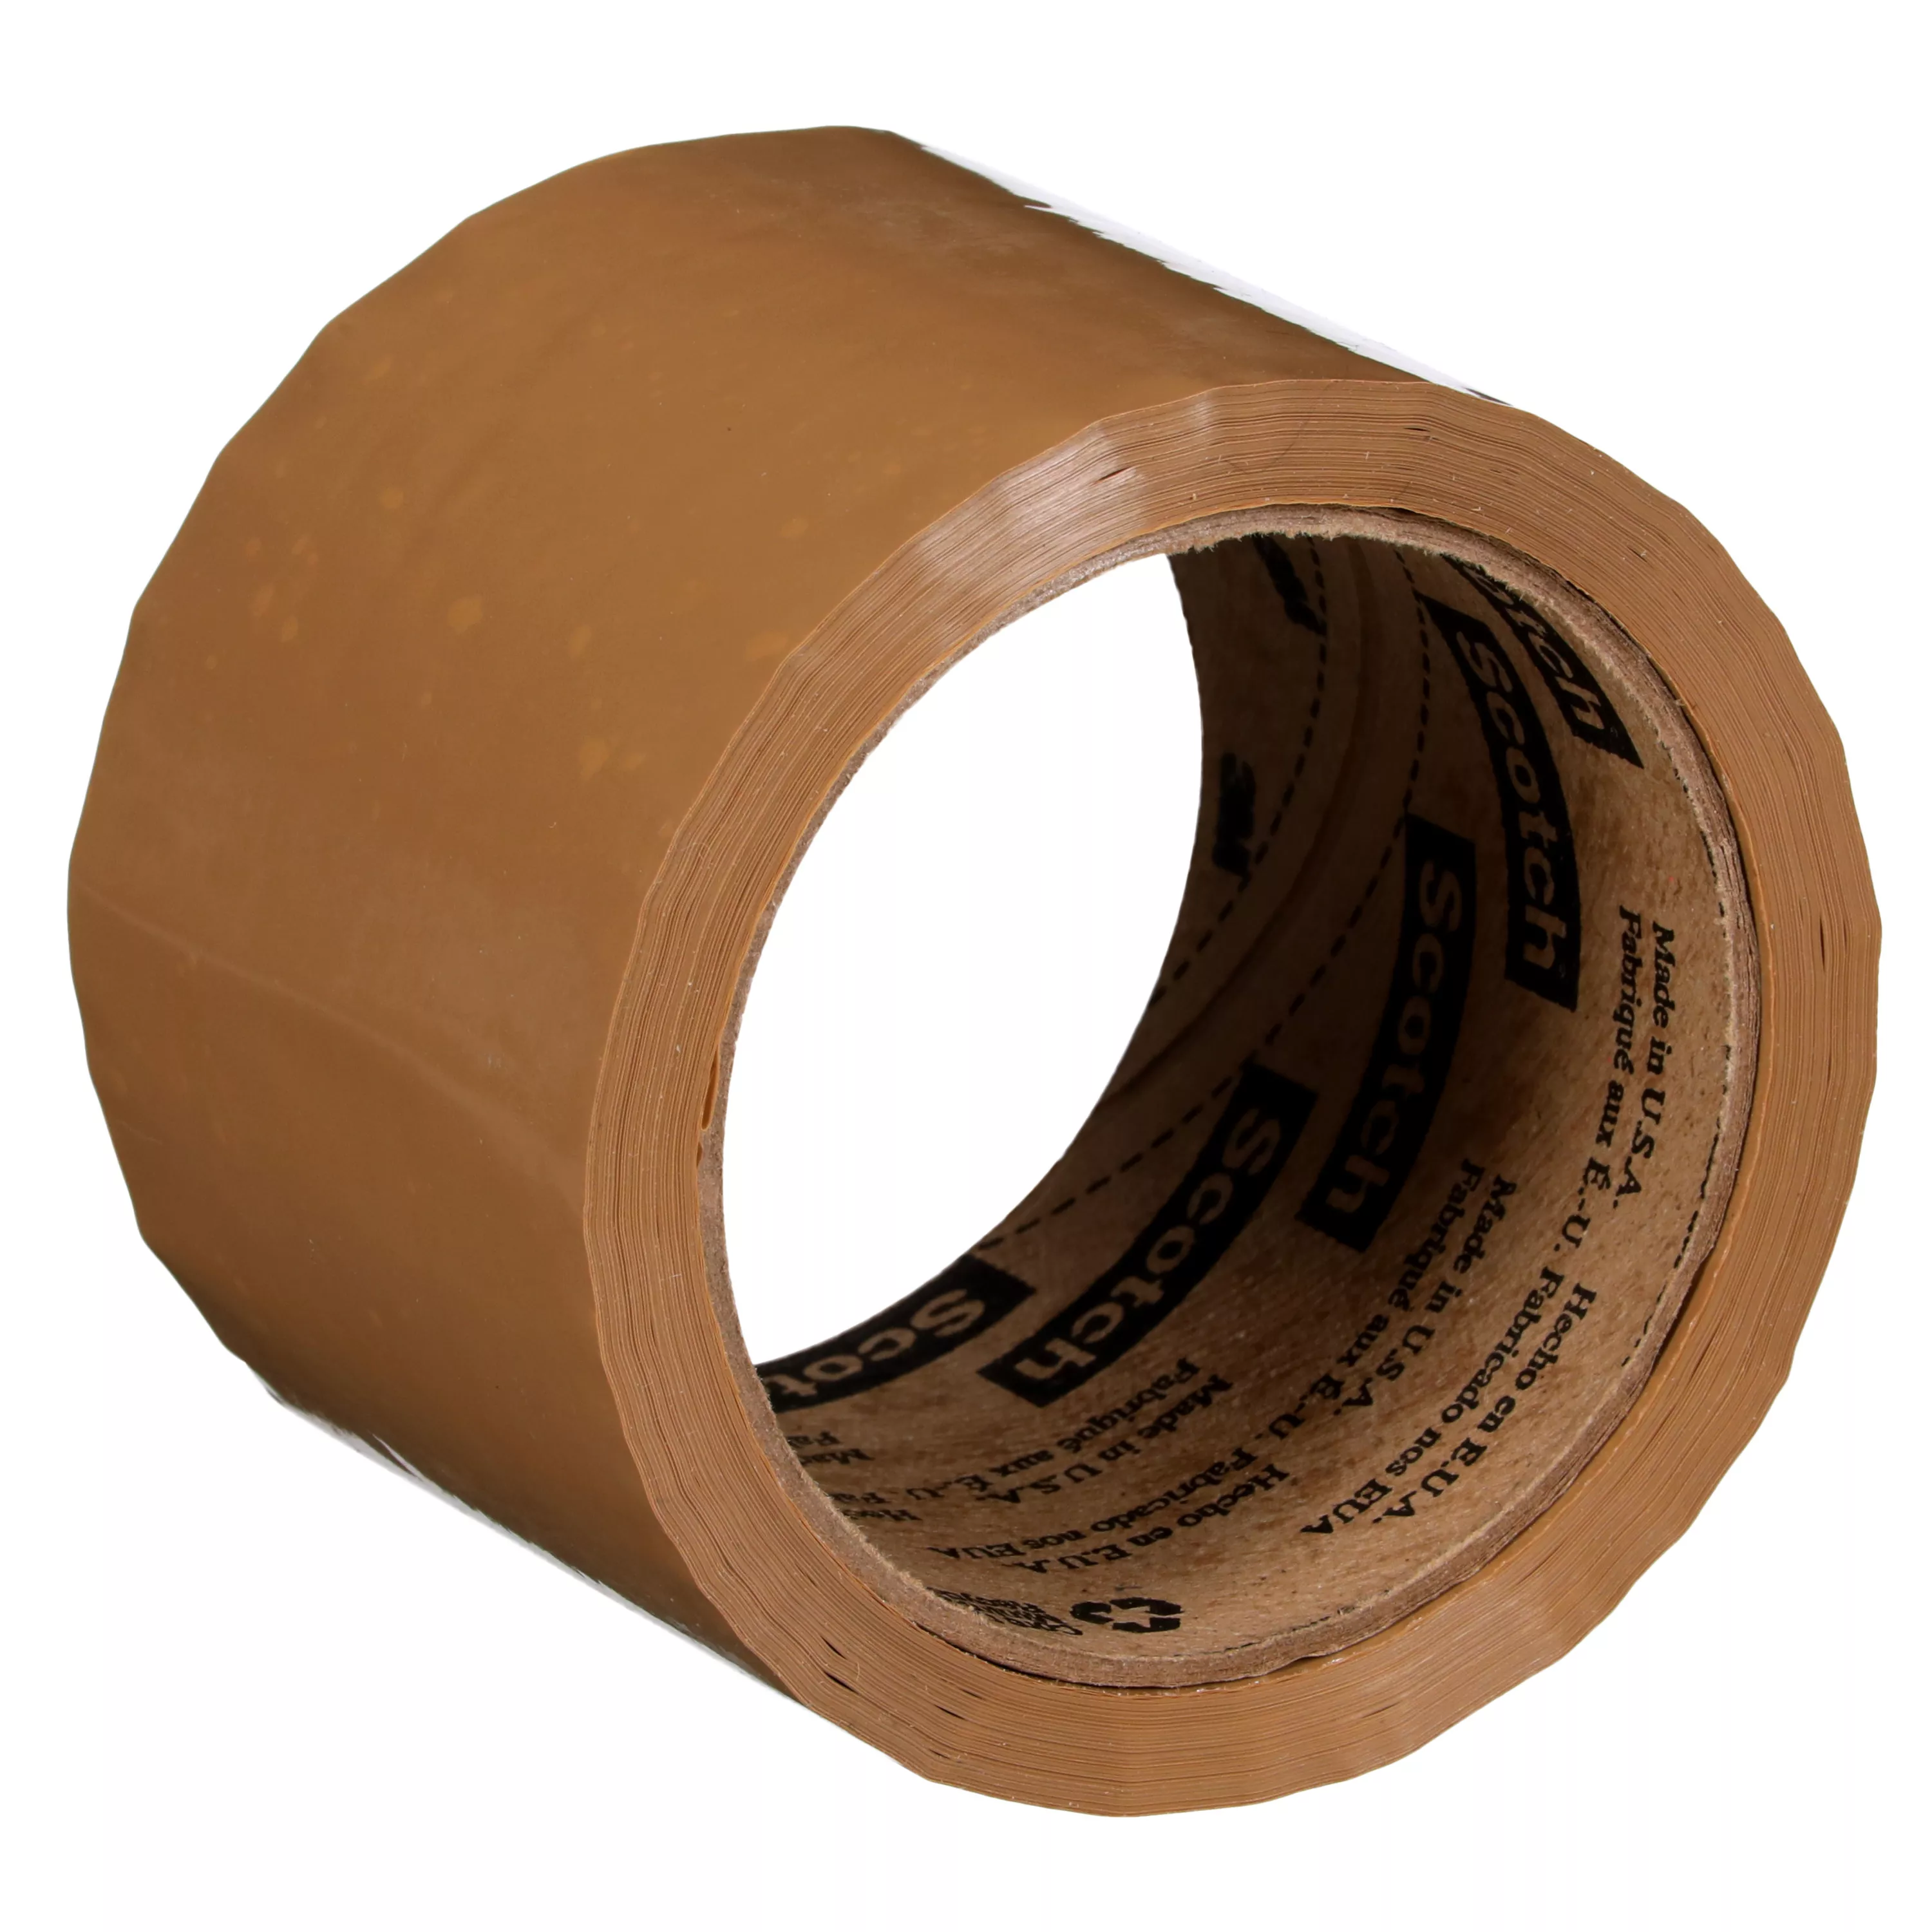 Scotch® Box Sealing Tape 371, Tan, 72 mm x 50 m, (6 Roll/PCK 4 PCK/CV)
24/Case, Conveniently Packaged